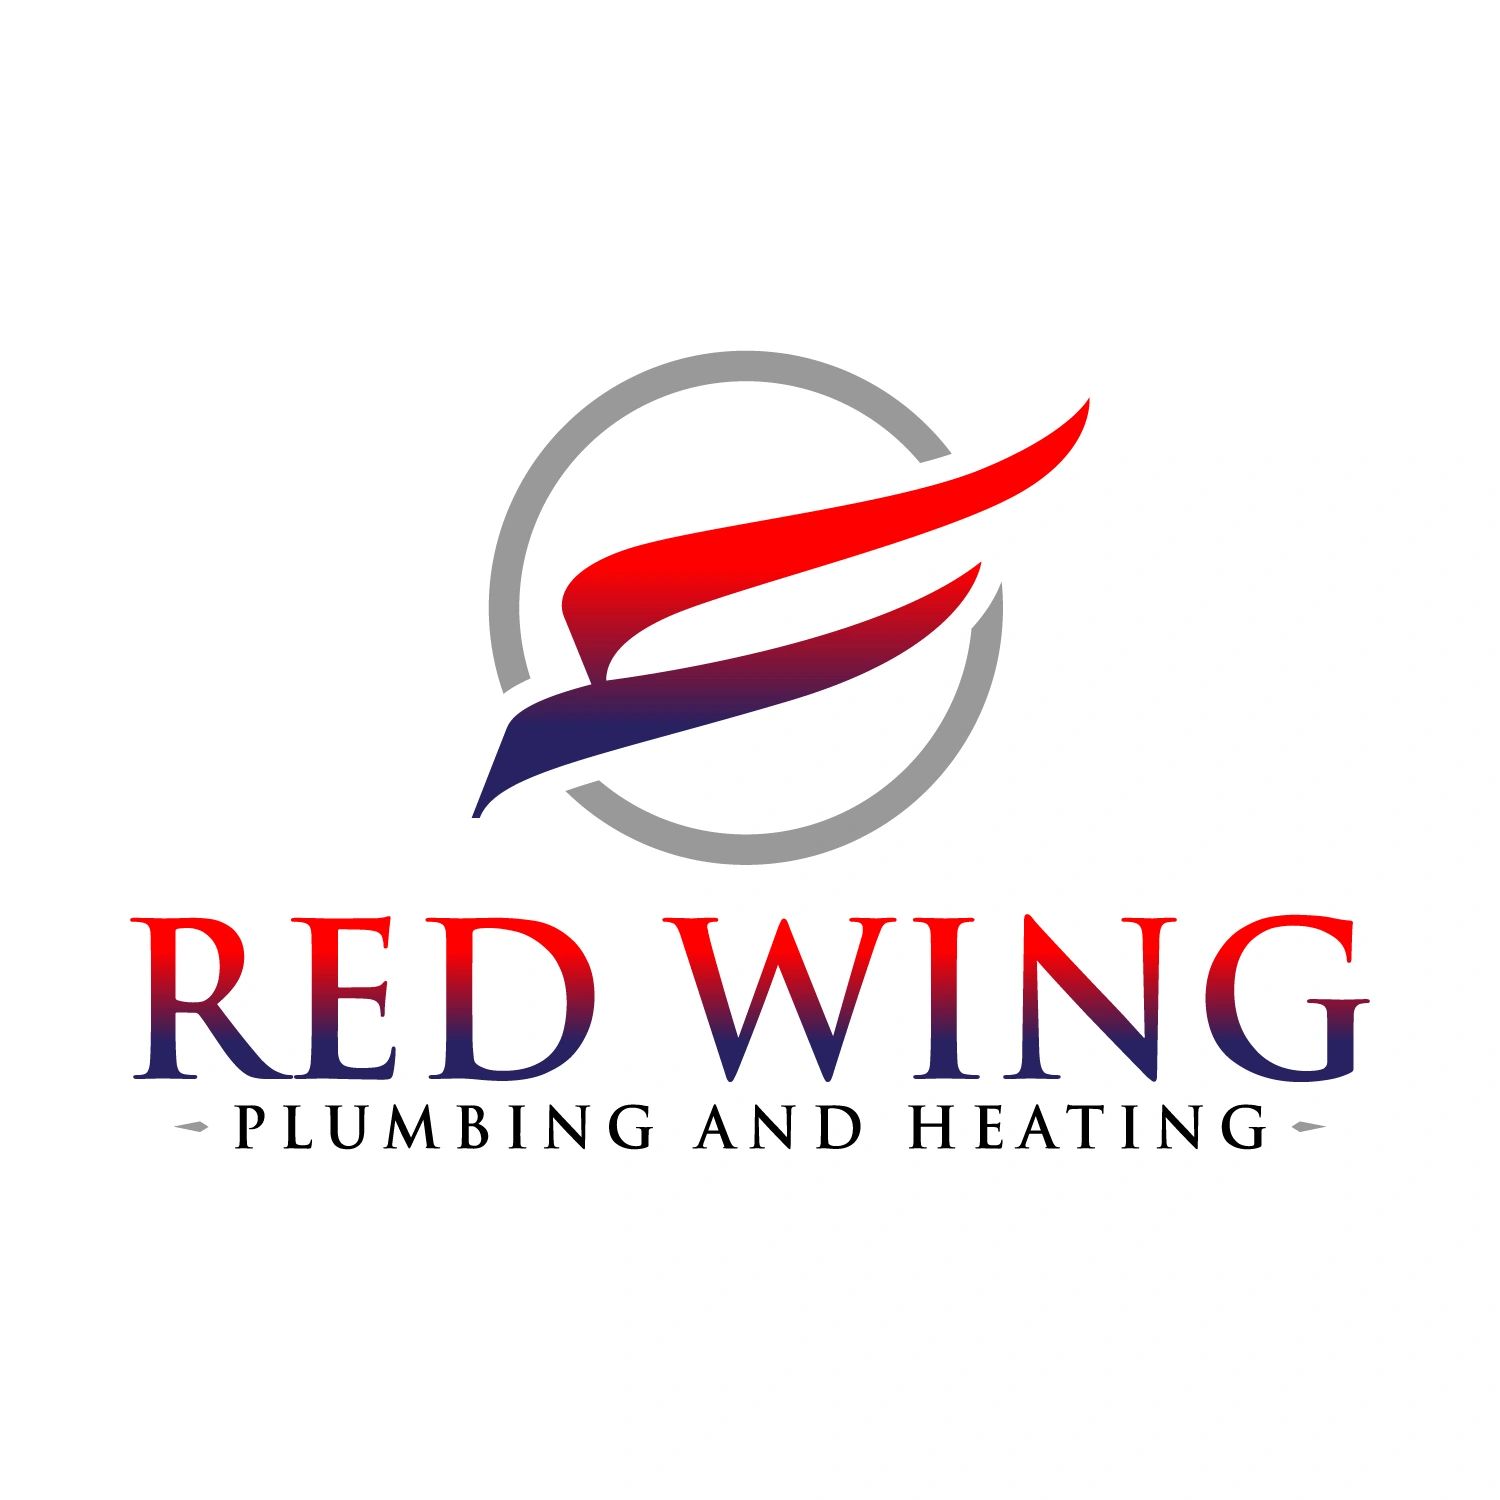 Contact | Red Wing Plumbing and Heating